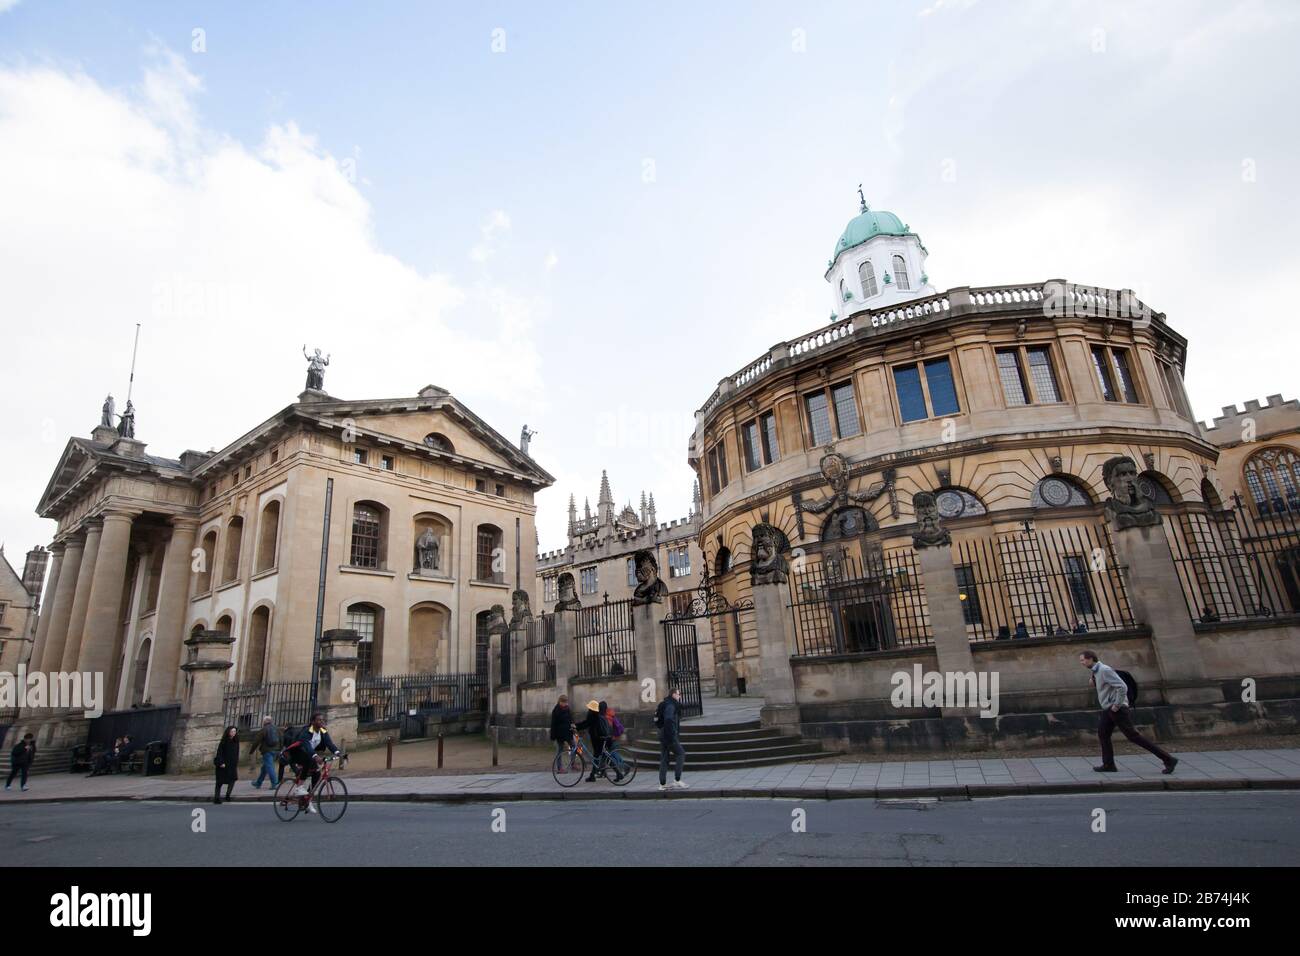 Oxford, Oxfordshire, UK 03 09 2020 The Bodleian Library in Oxford UK Stock Photo